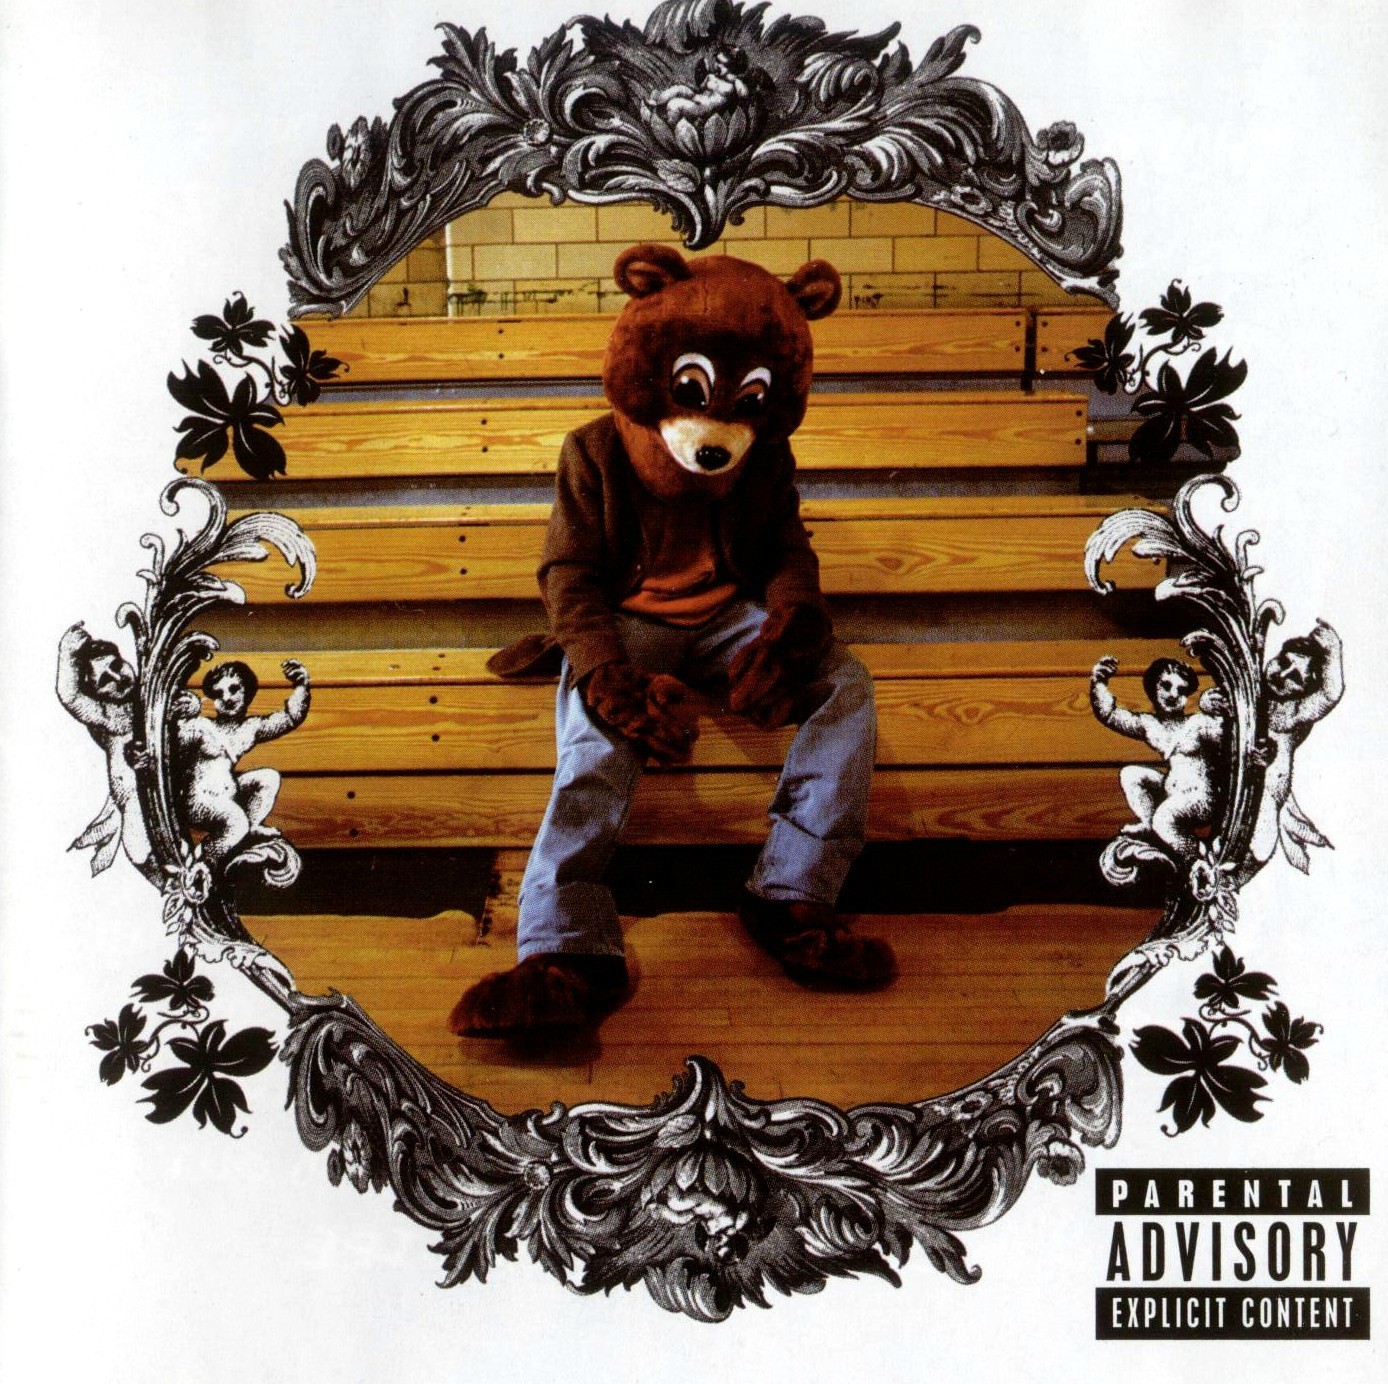 College Dropout Wallpapers